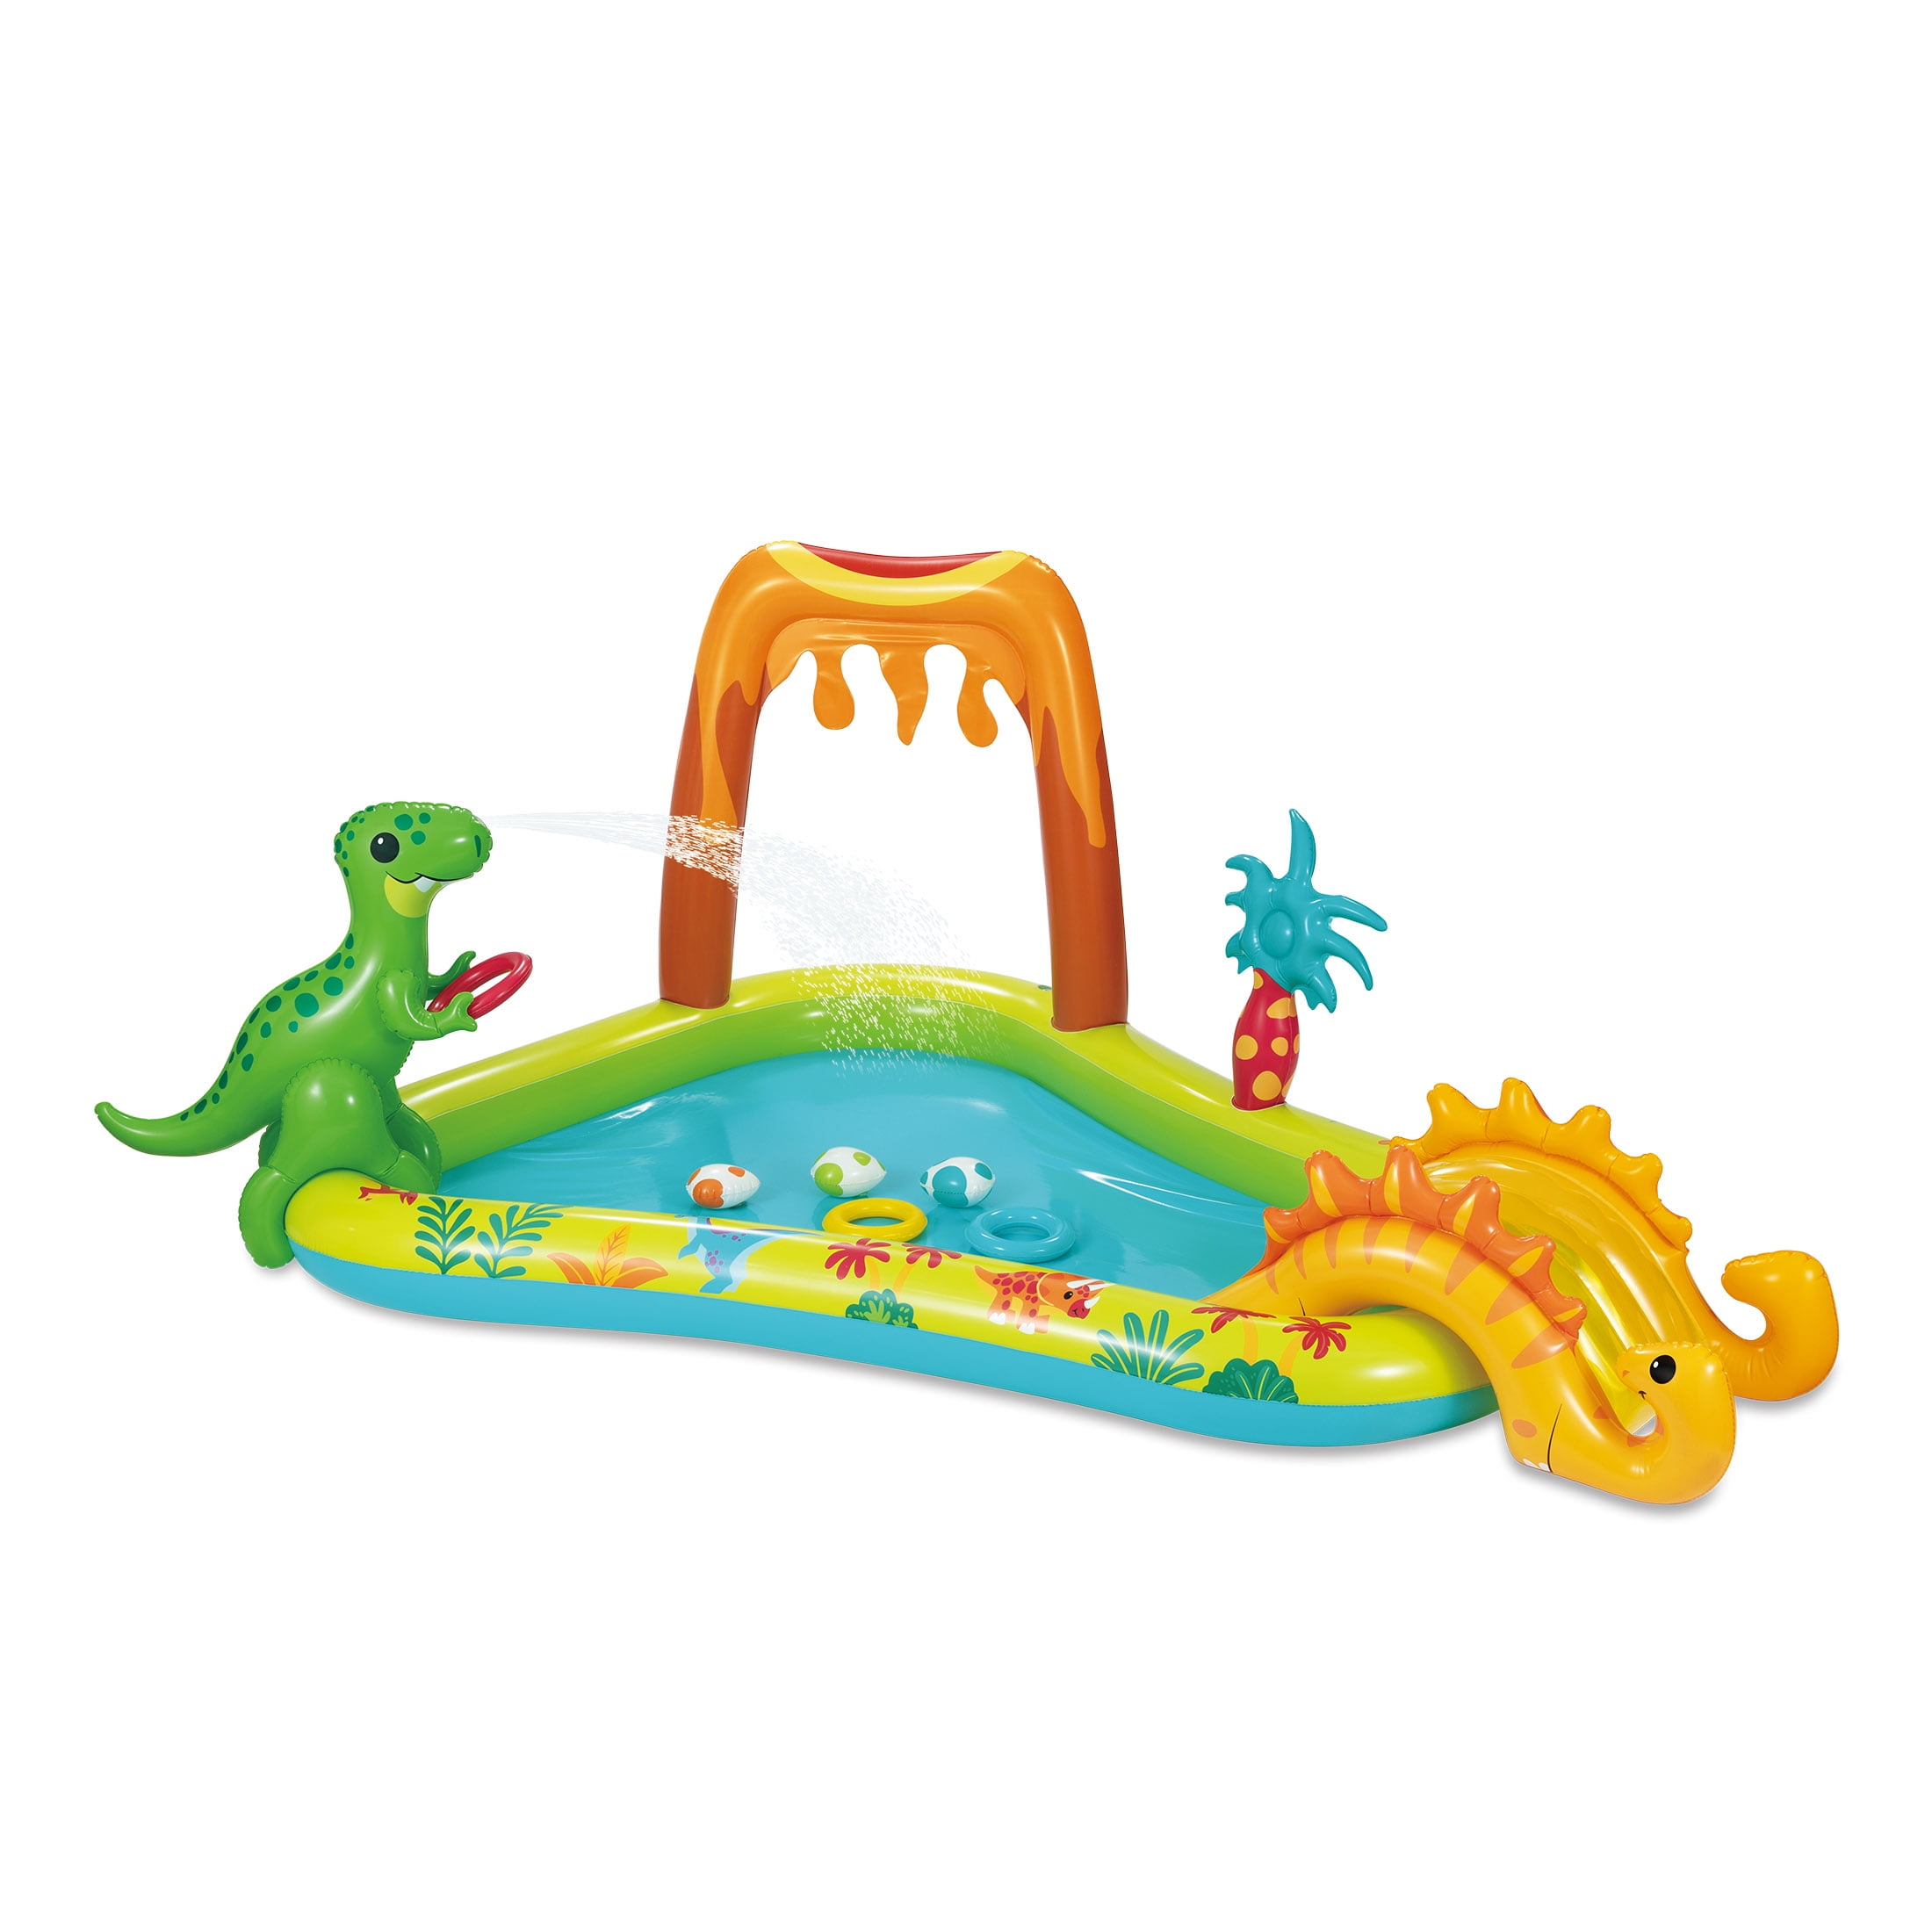 Details about   70"x25" Dinosaur Inflatable Padding Pools Kids Toddler Swimming Backyard Summer 